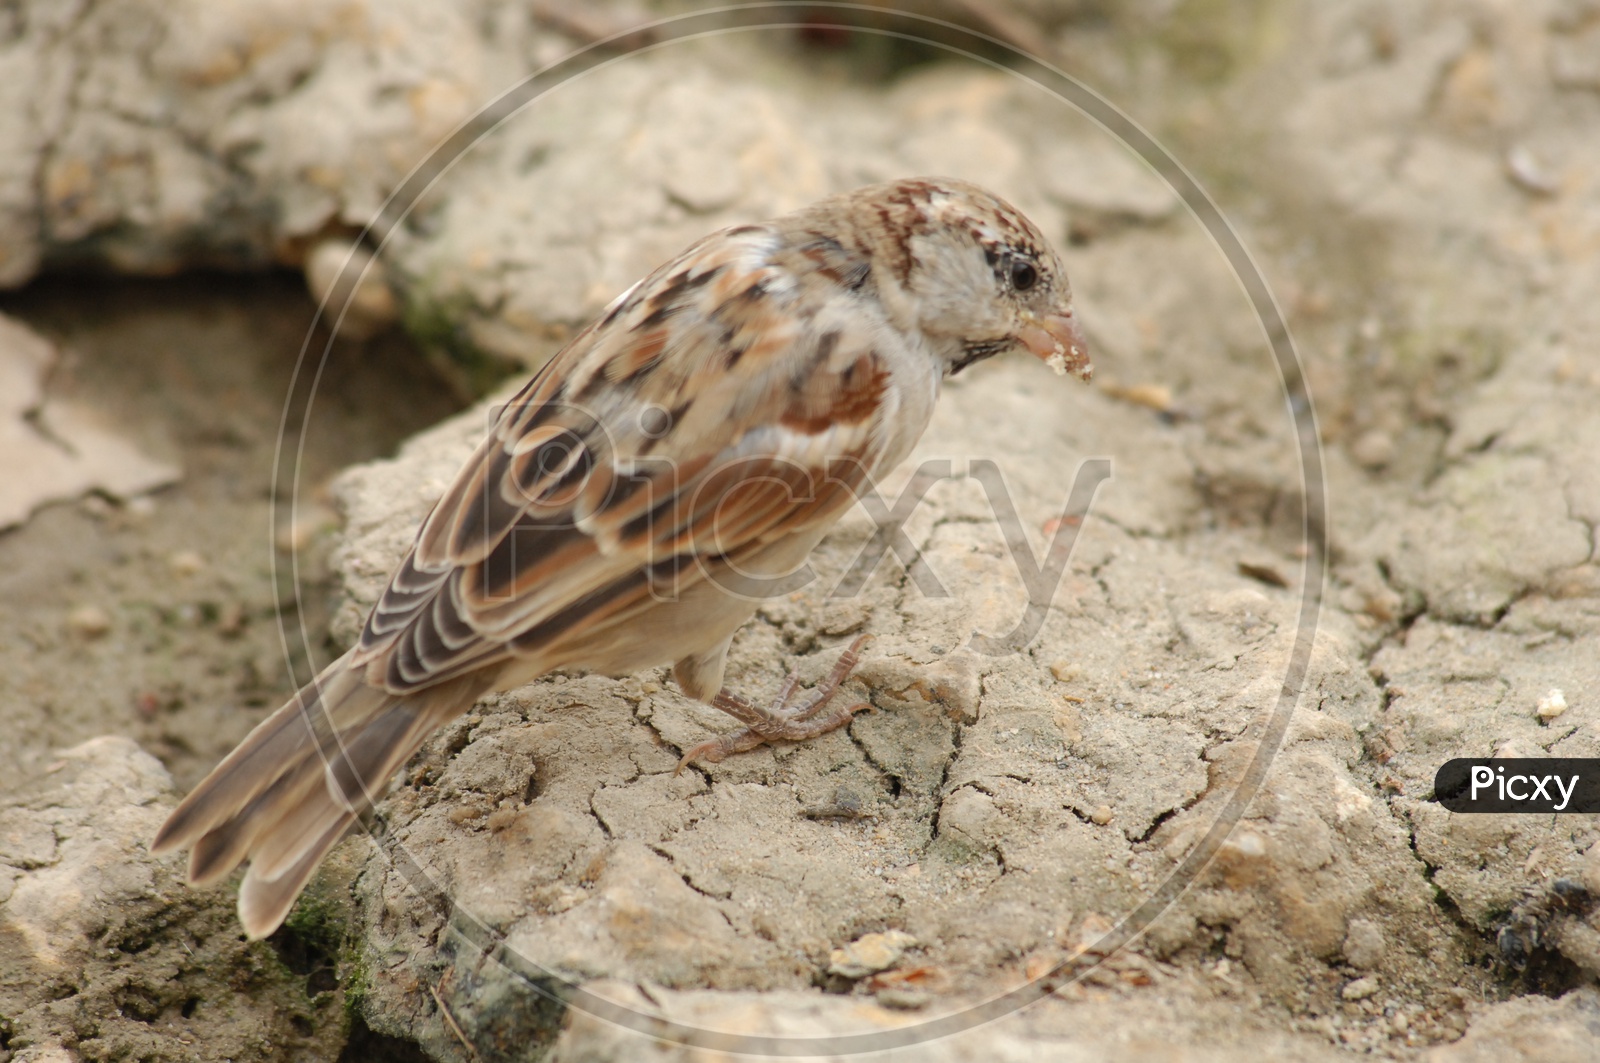 A Field sparrow along the tree branch